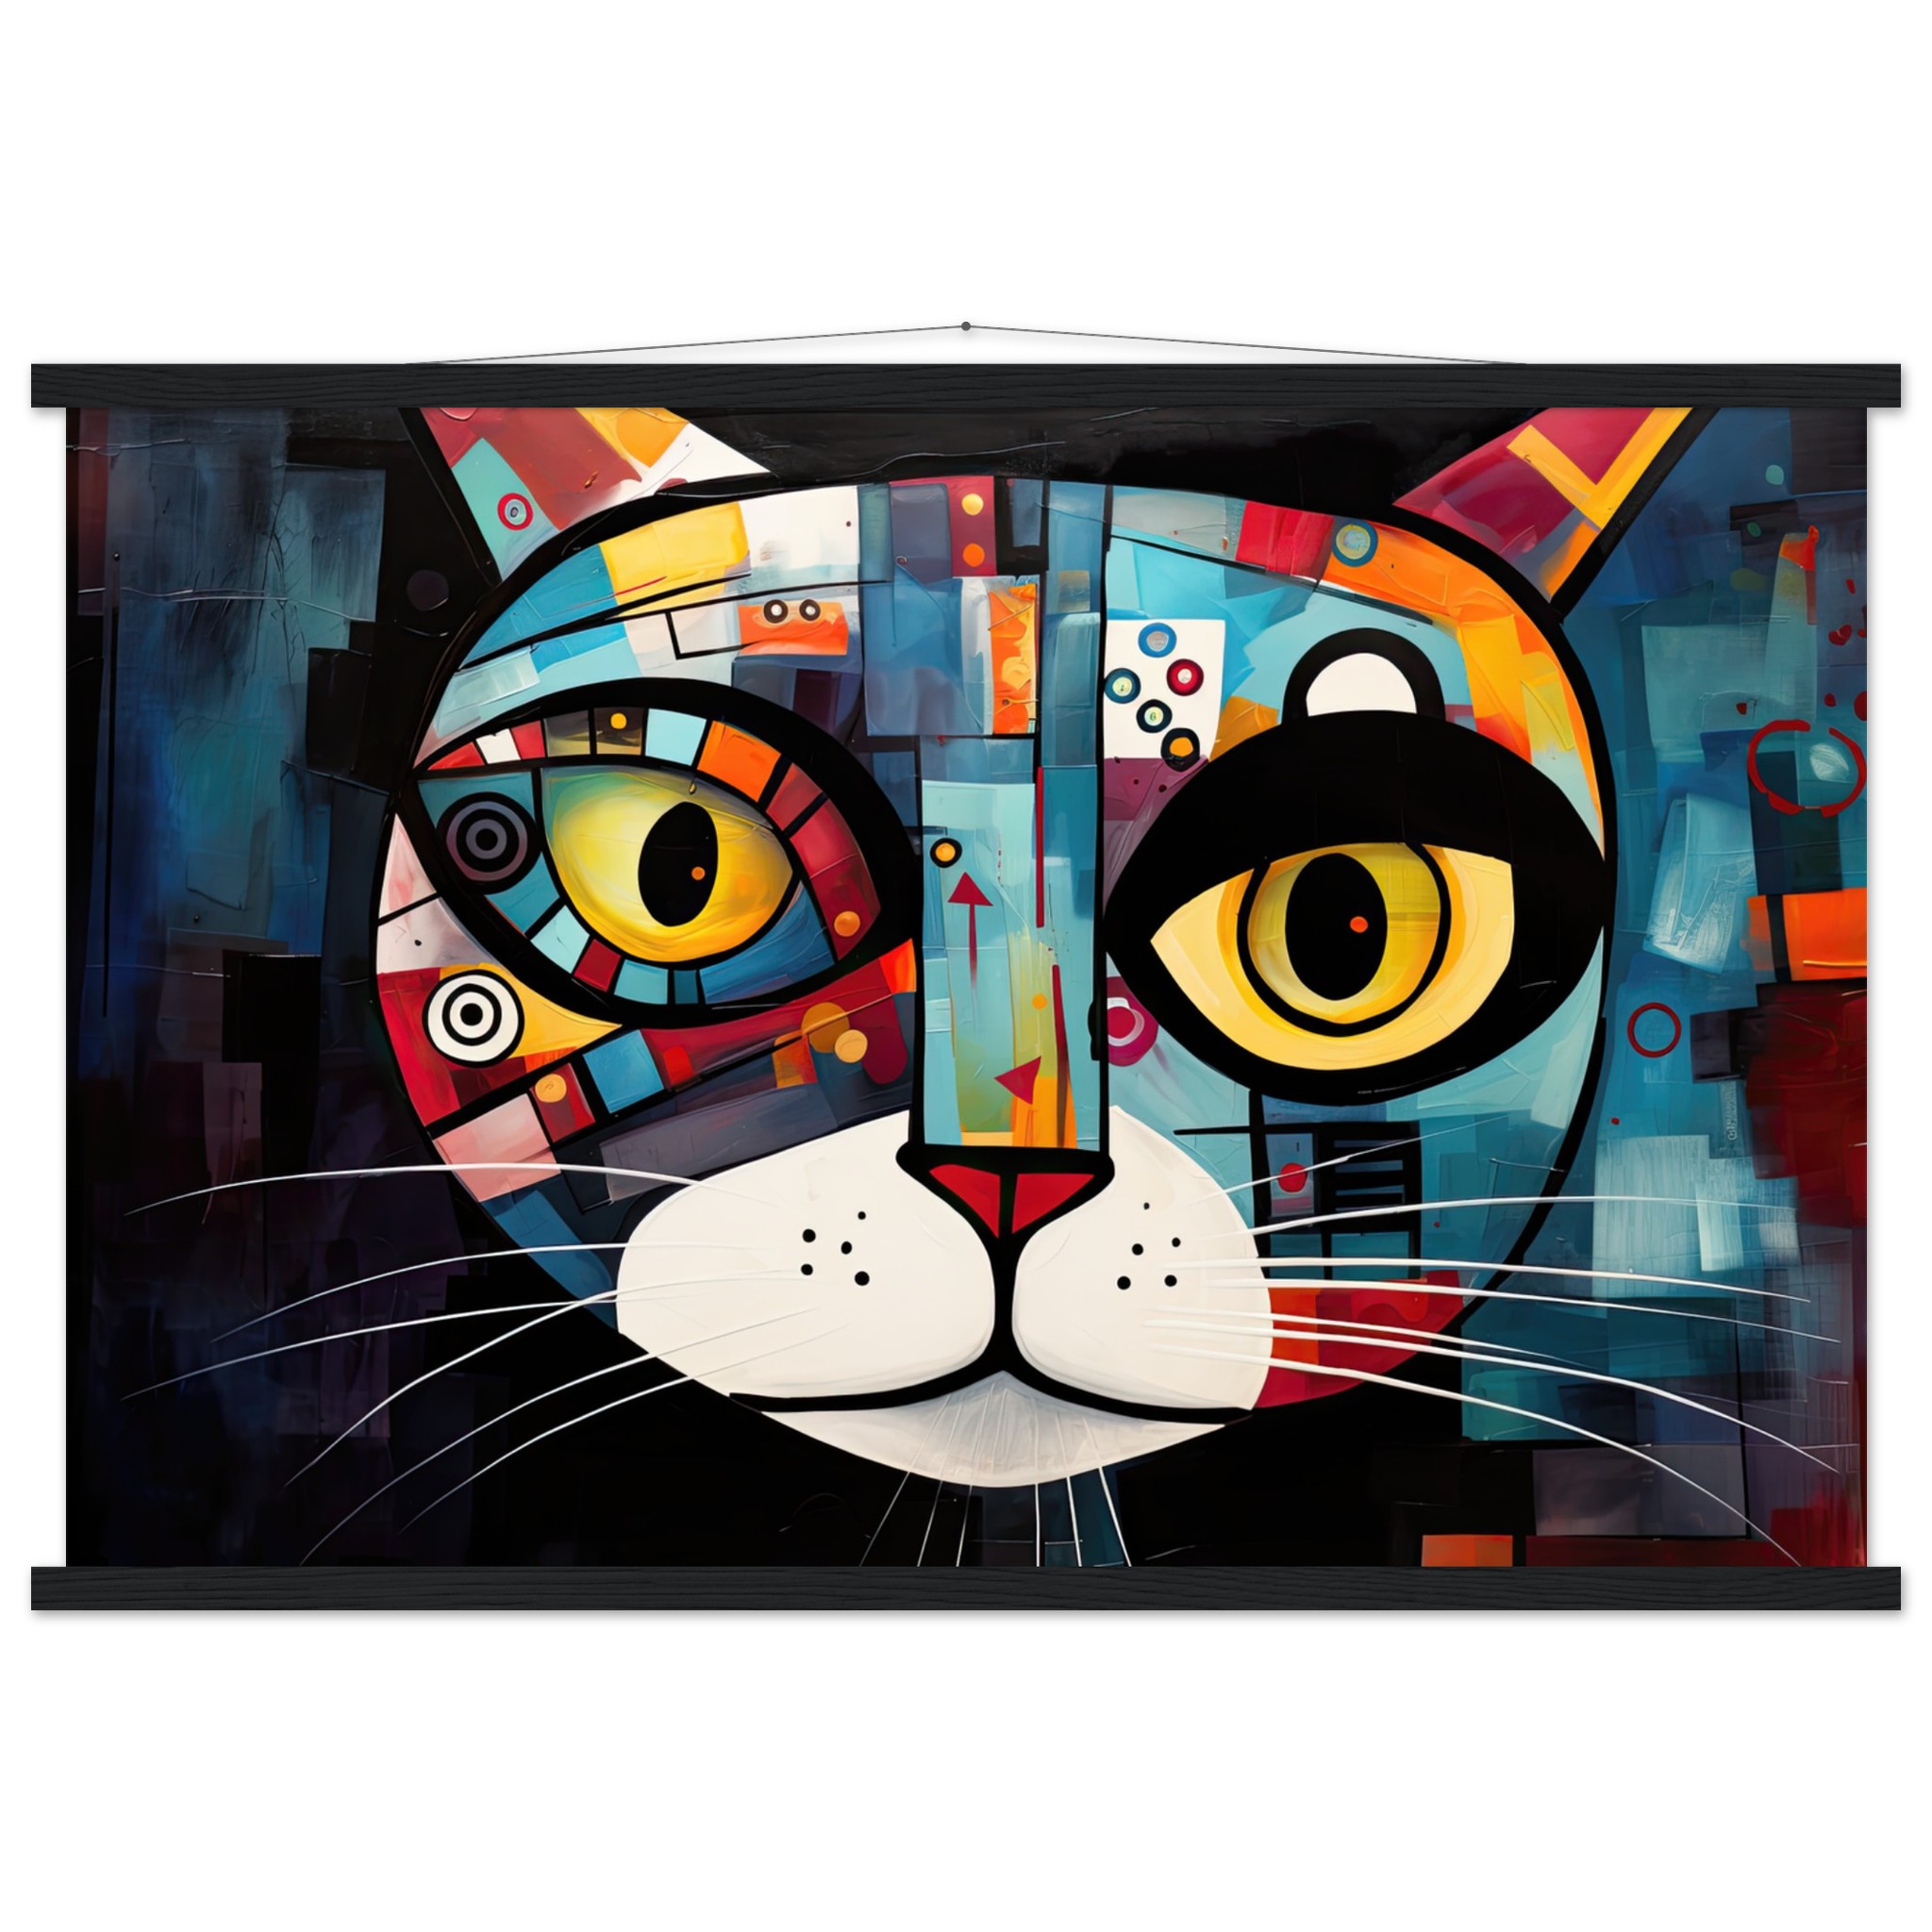 Abstract Painted Cat Face Hanging Print – 60×90 cm / 24×36″, Black wall hanger